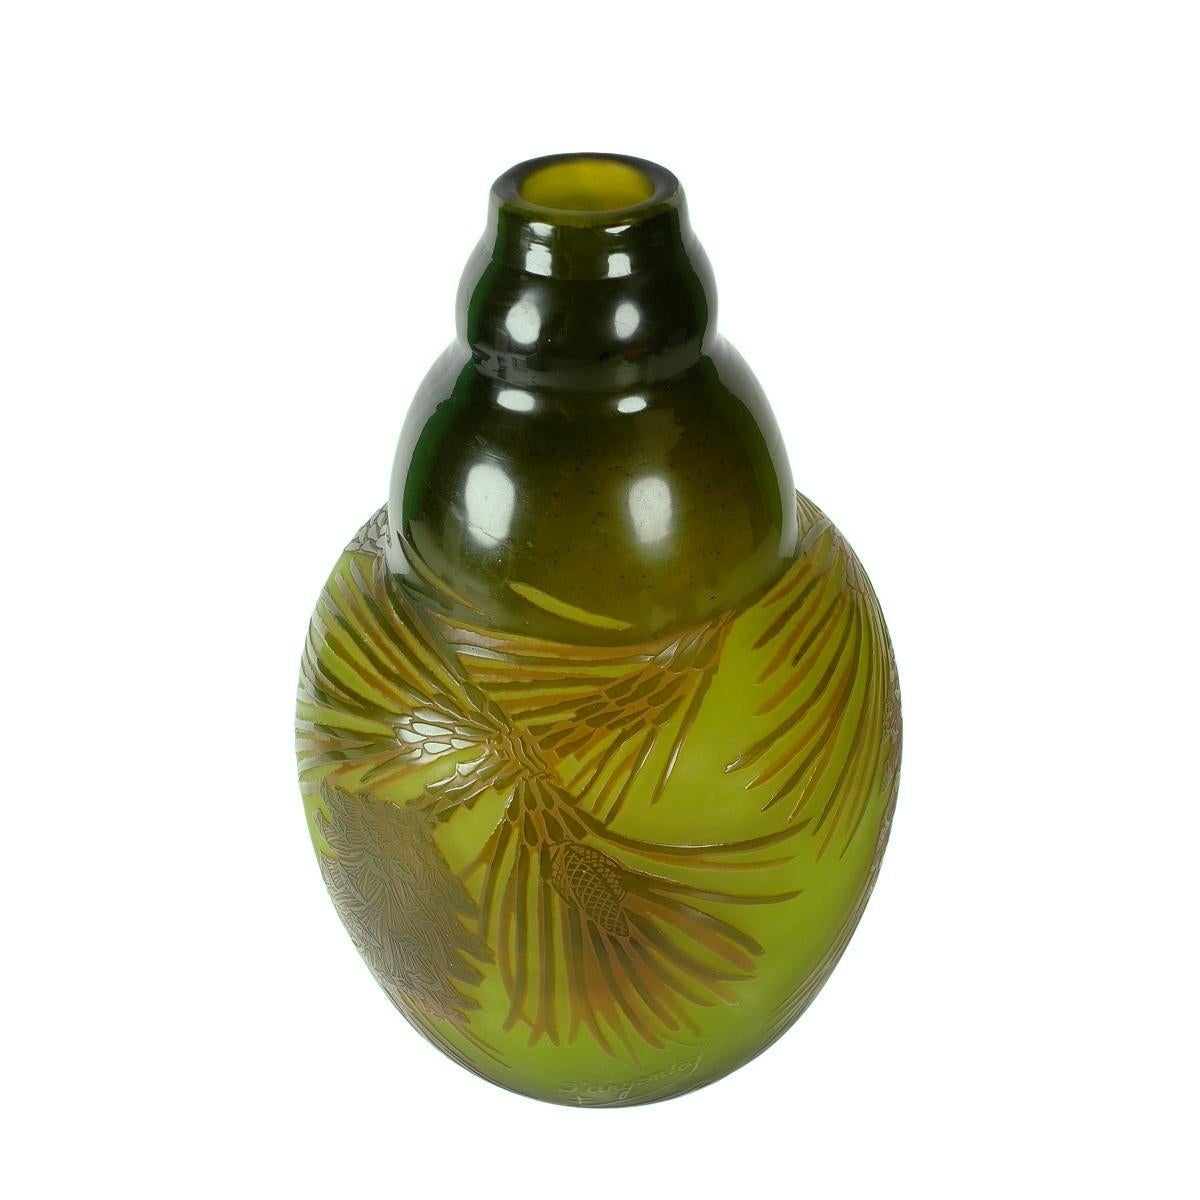 Offering this vintage D'Argental “Pine Cones” cameo relief art glass vase. This acid etched and polished cameo vase has a detailed pinecone and pine needle design a deep olive green to amber color against a pale green to amber body. Vase is acid